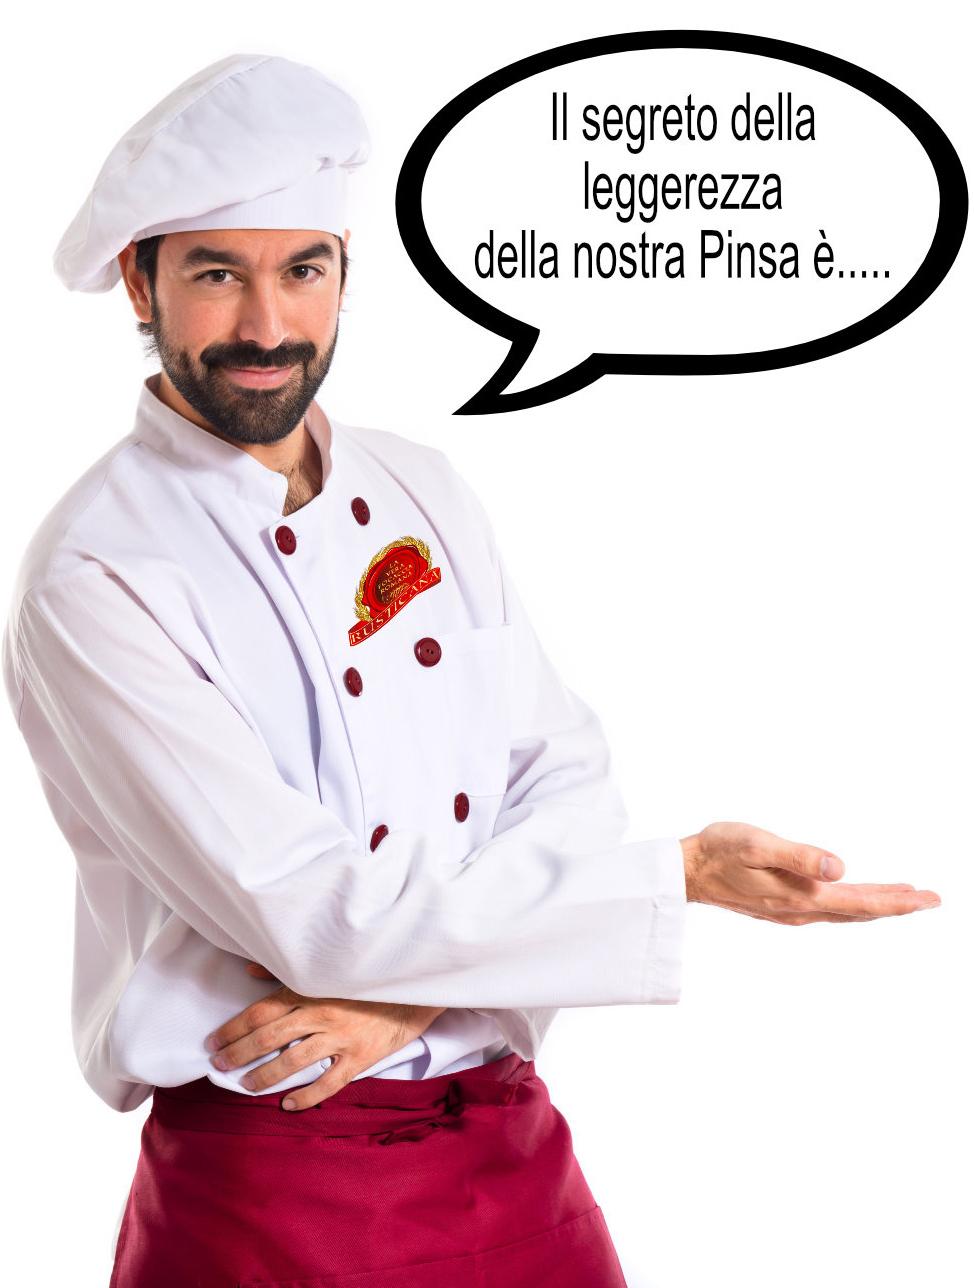 Chef presenting something over white background